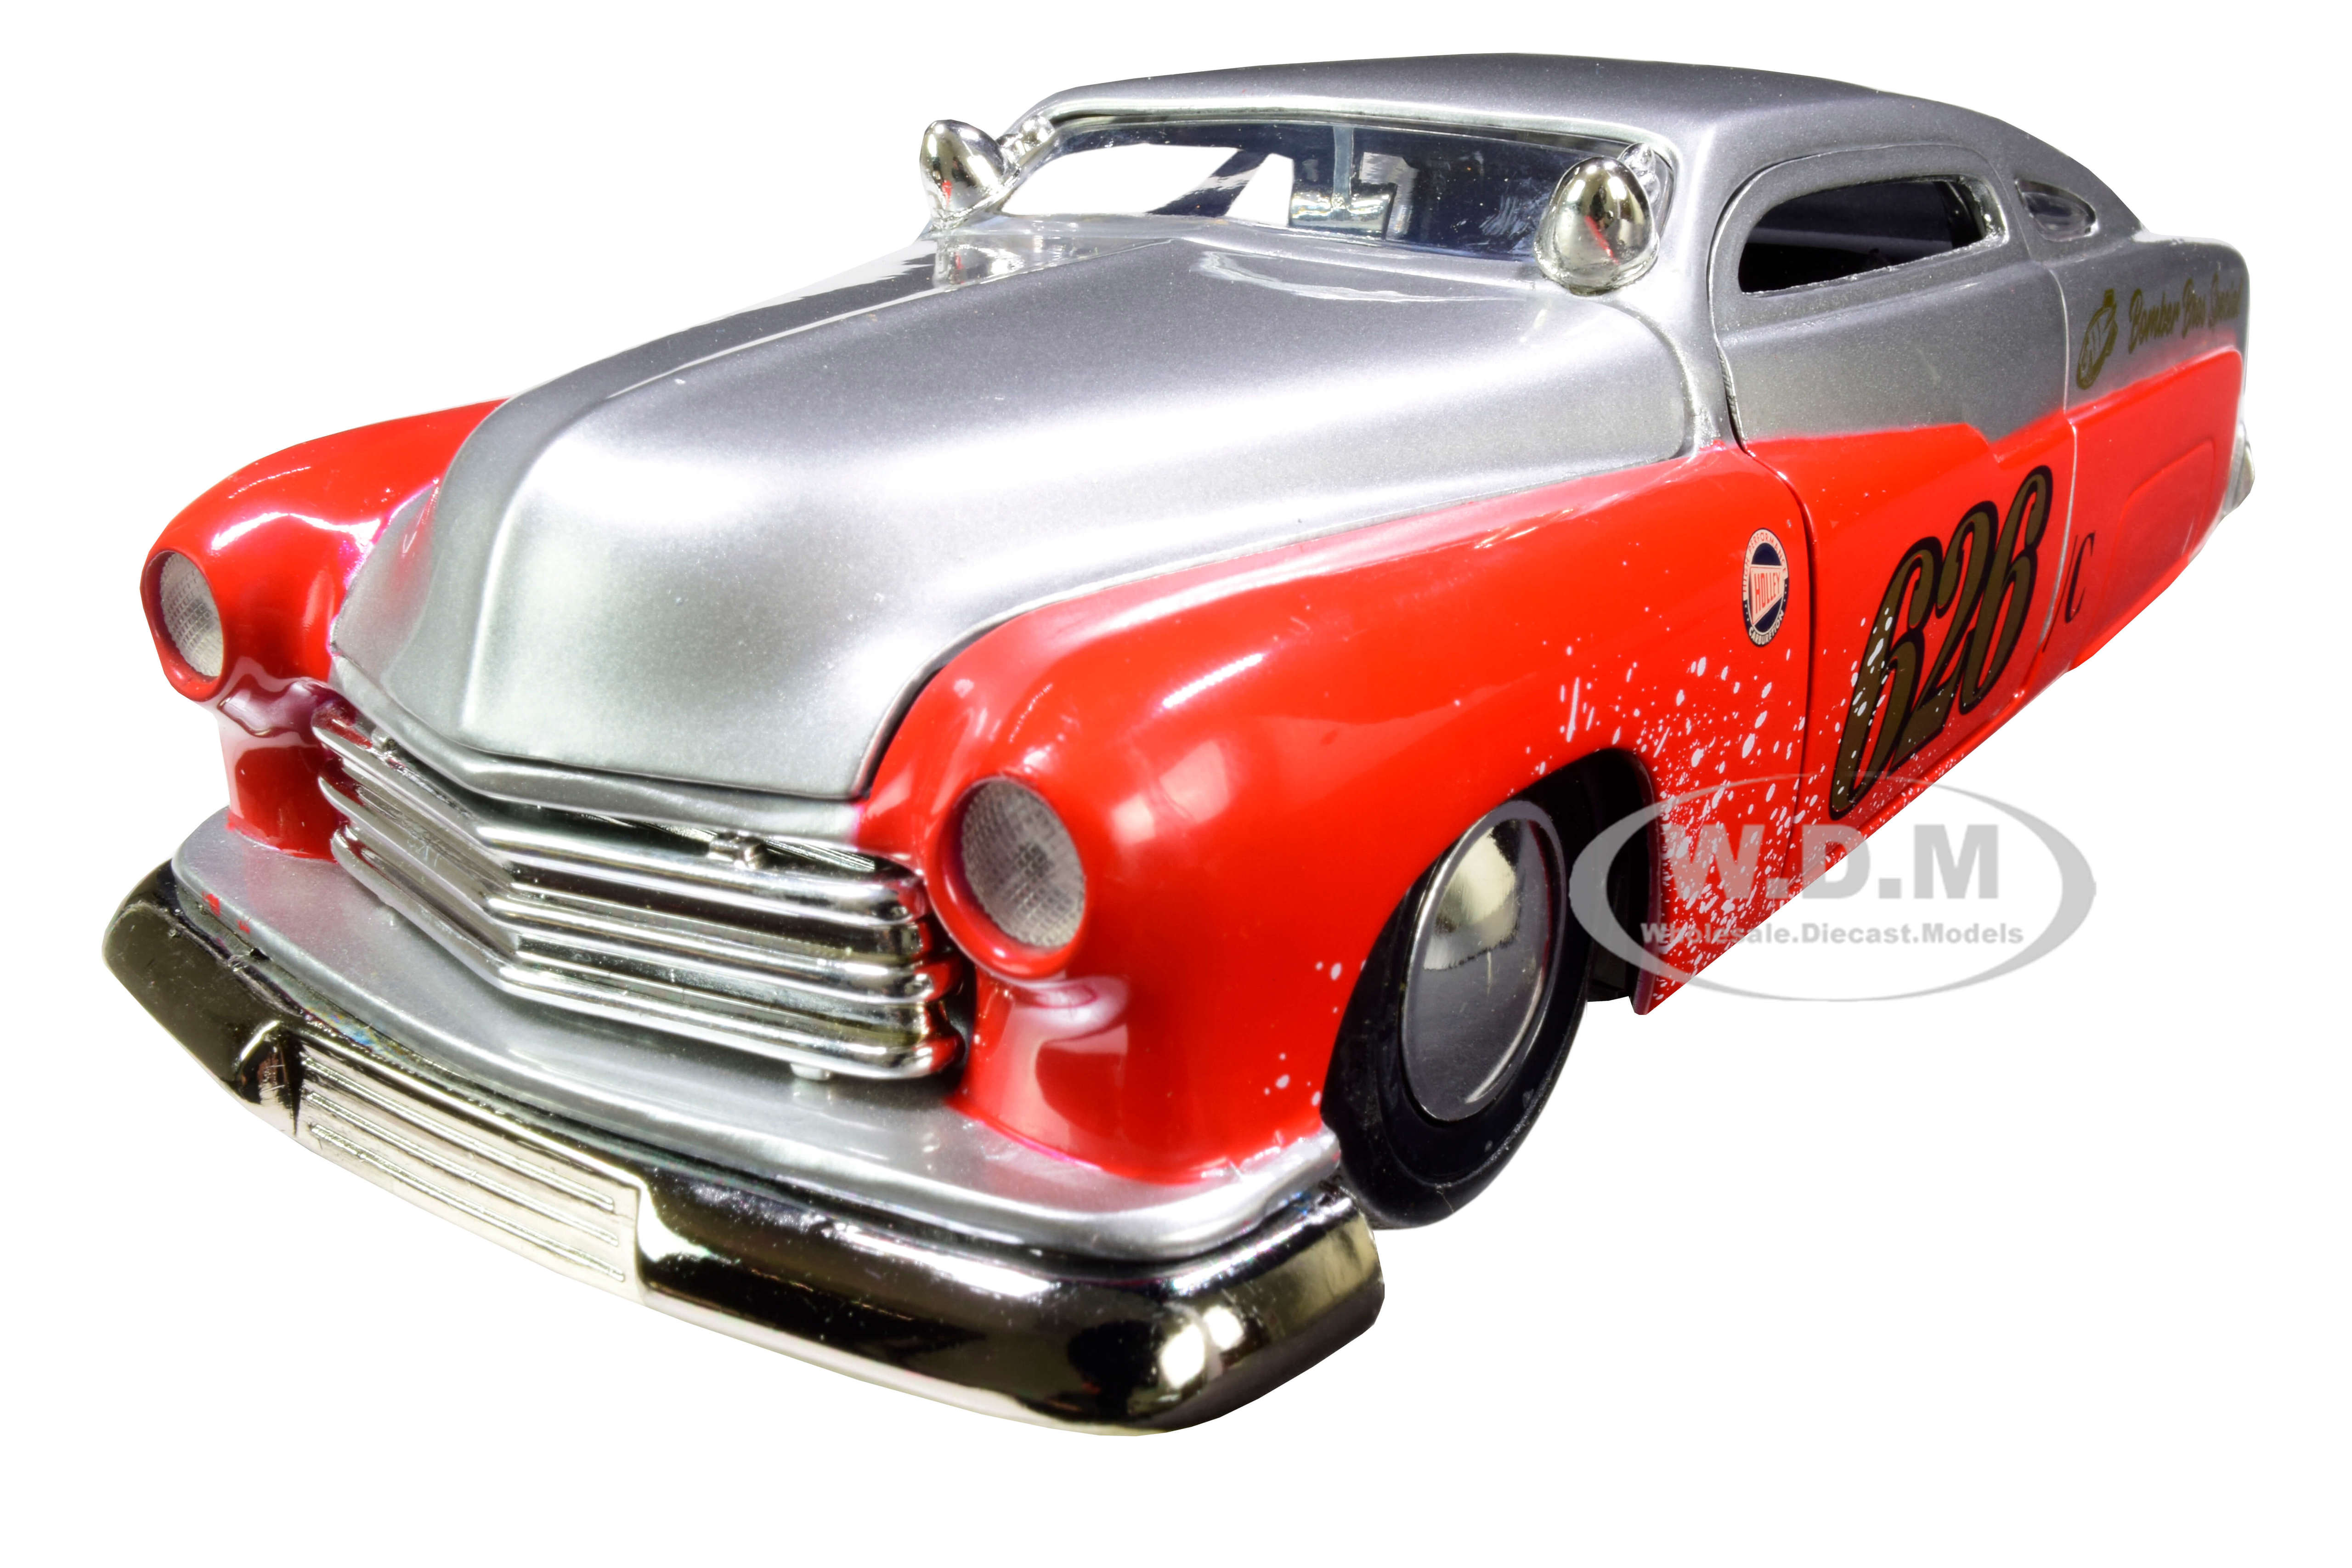 1951 Mercury Silver and Red 626 "Holley" "Bomber Bros Special" "Bigtime Muscle" 1/24 Diecast Model Car by Jada